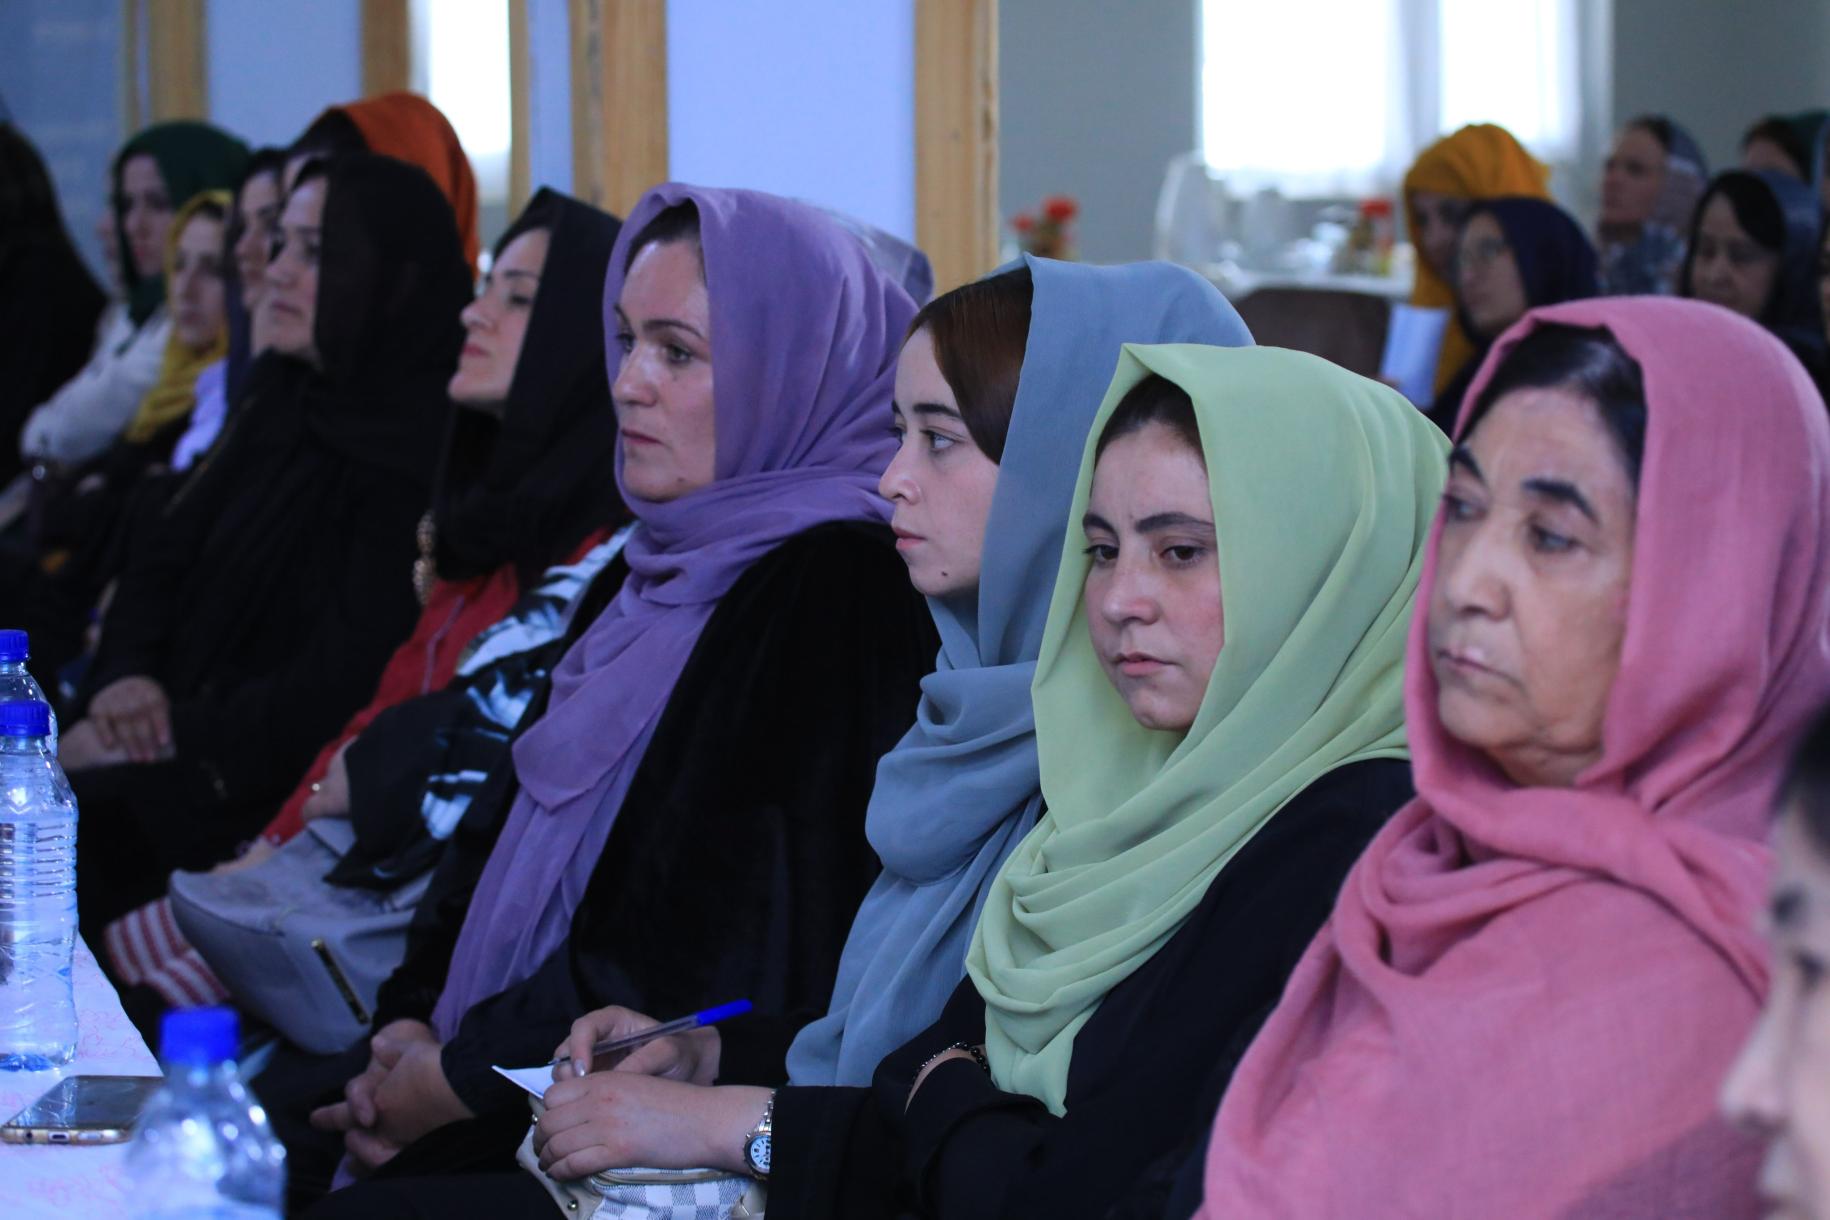 Women with colorful headscarfs sitting in a row